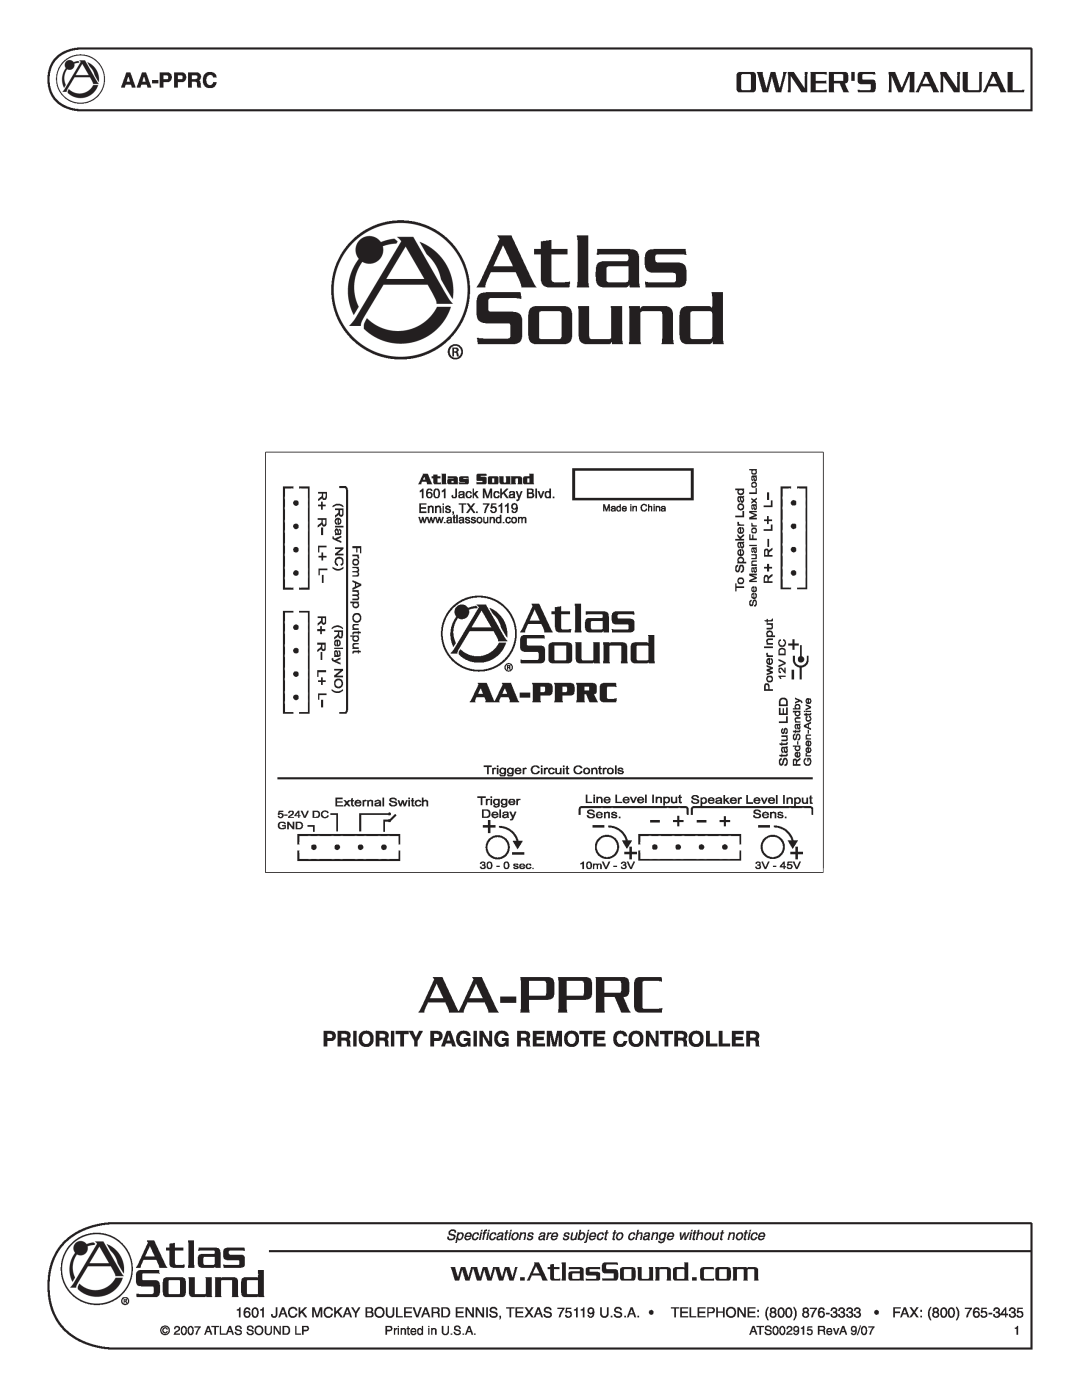 Atlas Sound AA-PPRC owner manual Owners Manual, Aa-Pprc, Priority Paging Remote Controller, TELEPHONE 800, FAX 800 